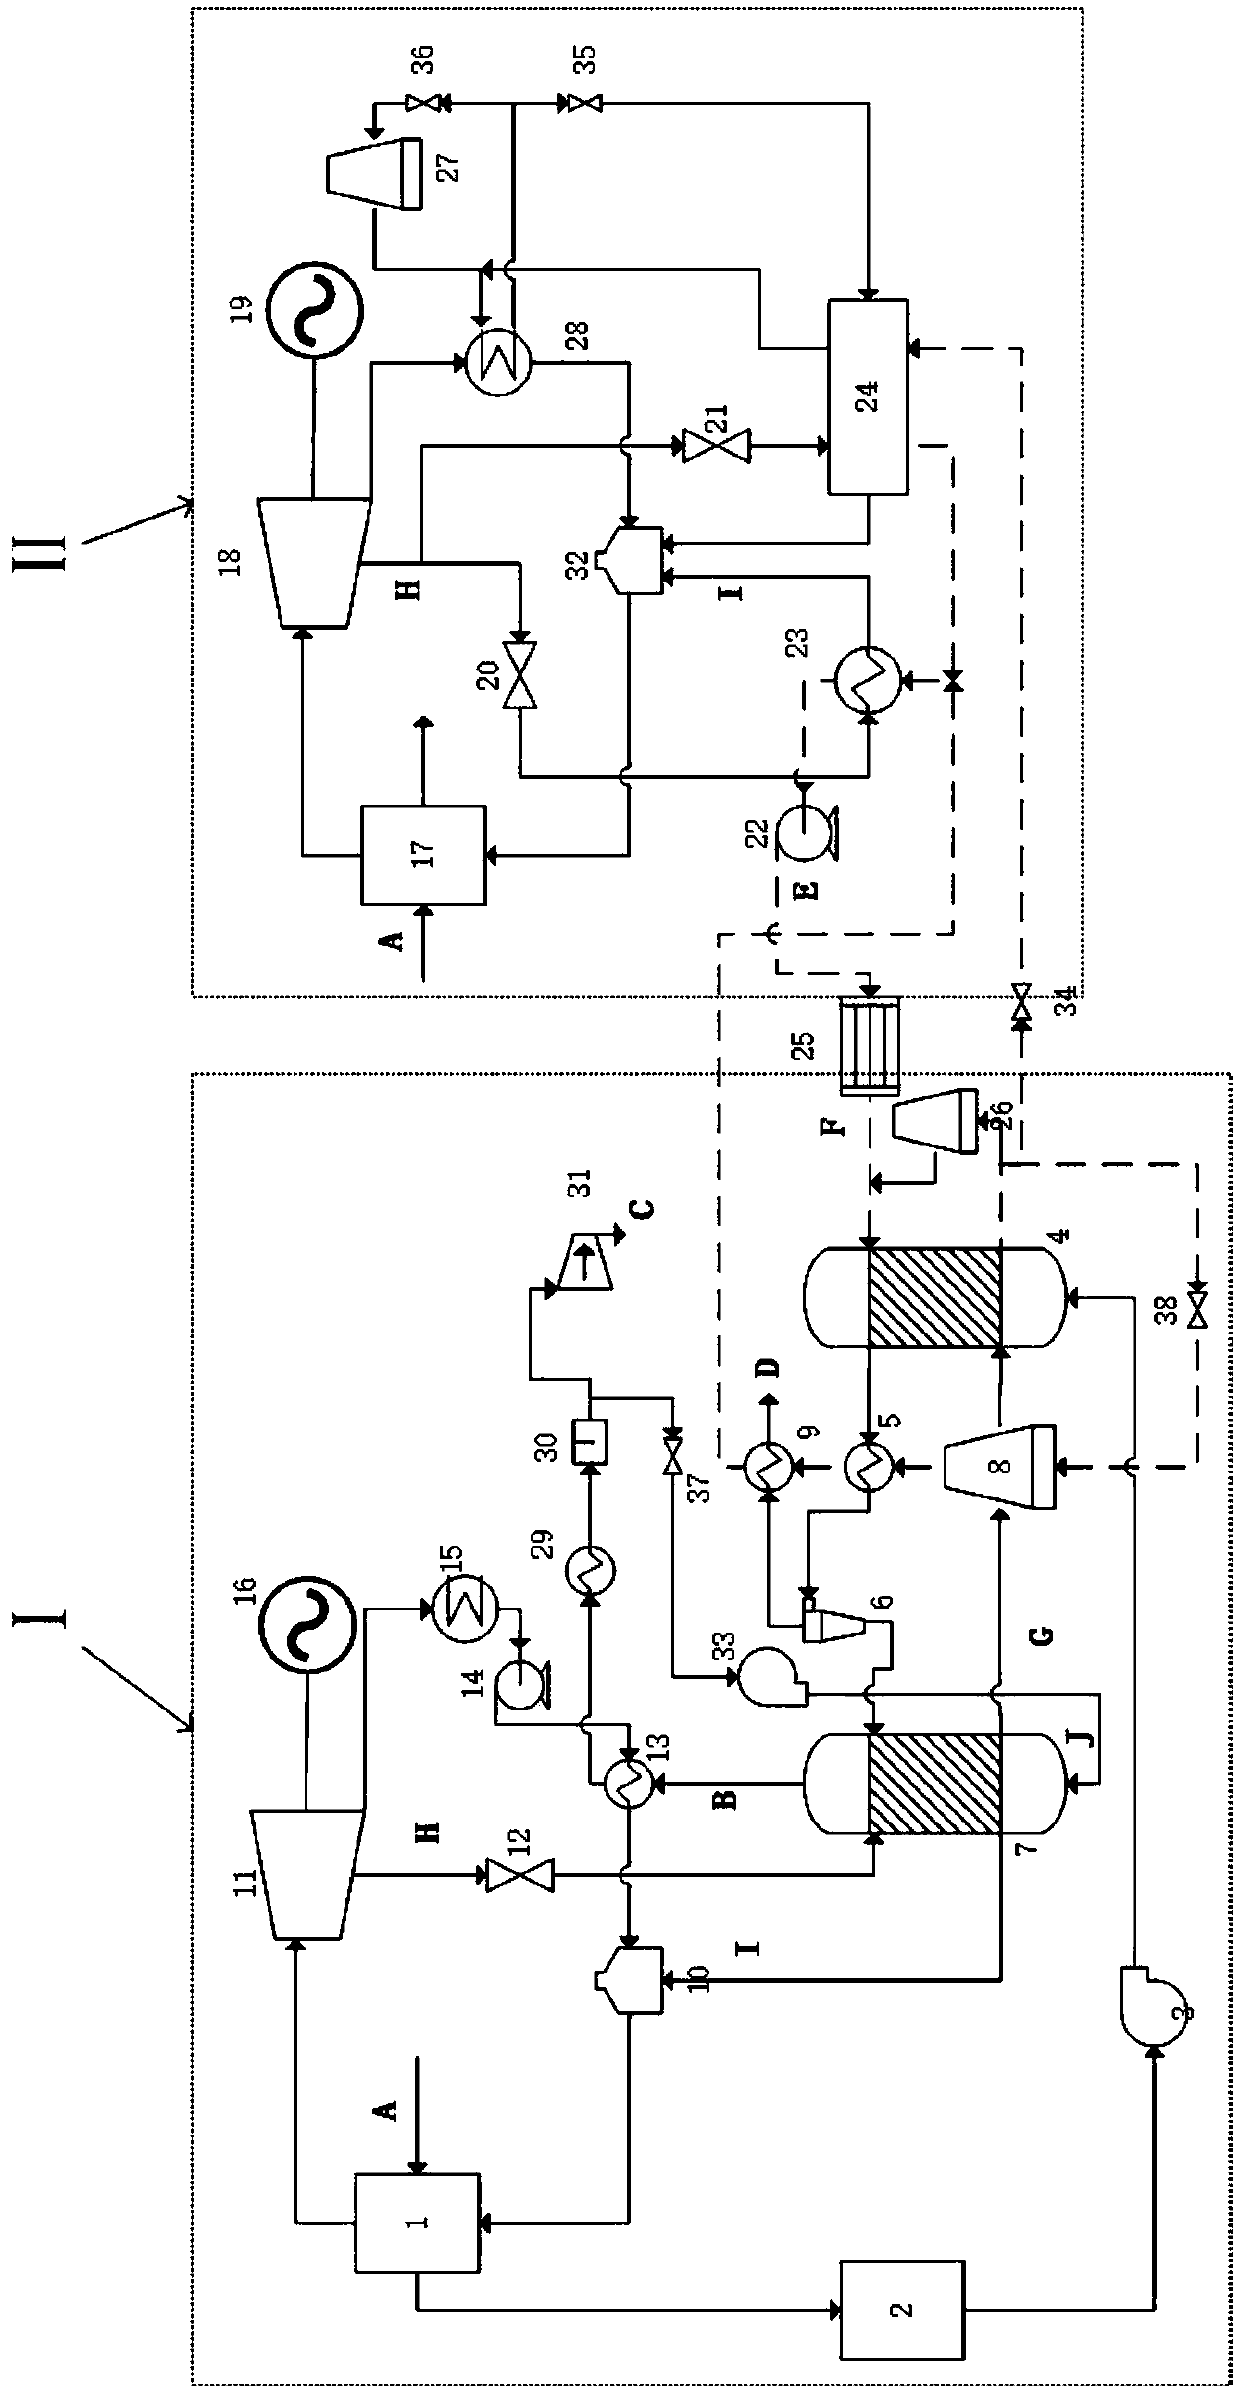 System for recovering waste heat during dry capture of CO2 for thermal power stations and using waste heat for heat supply